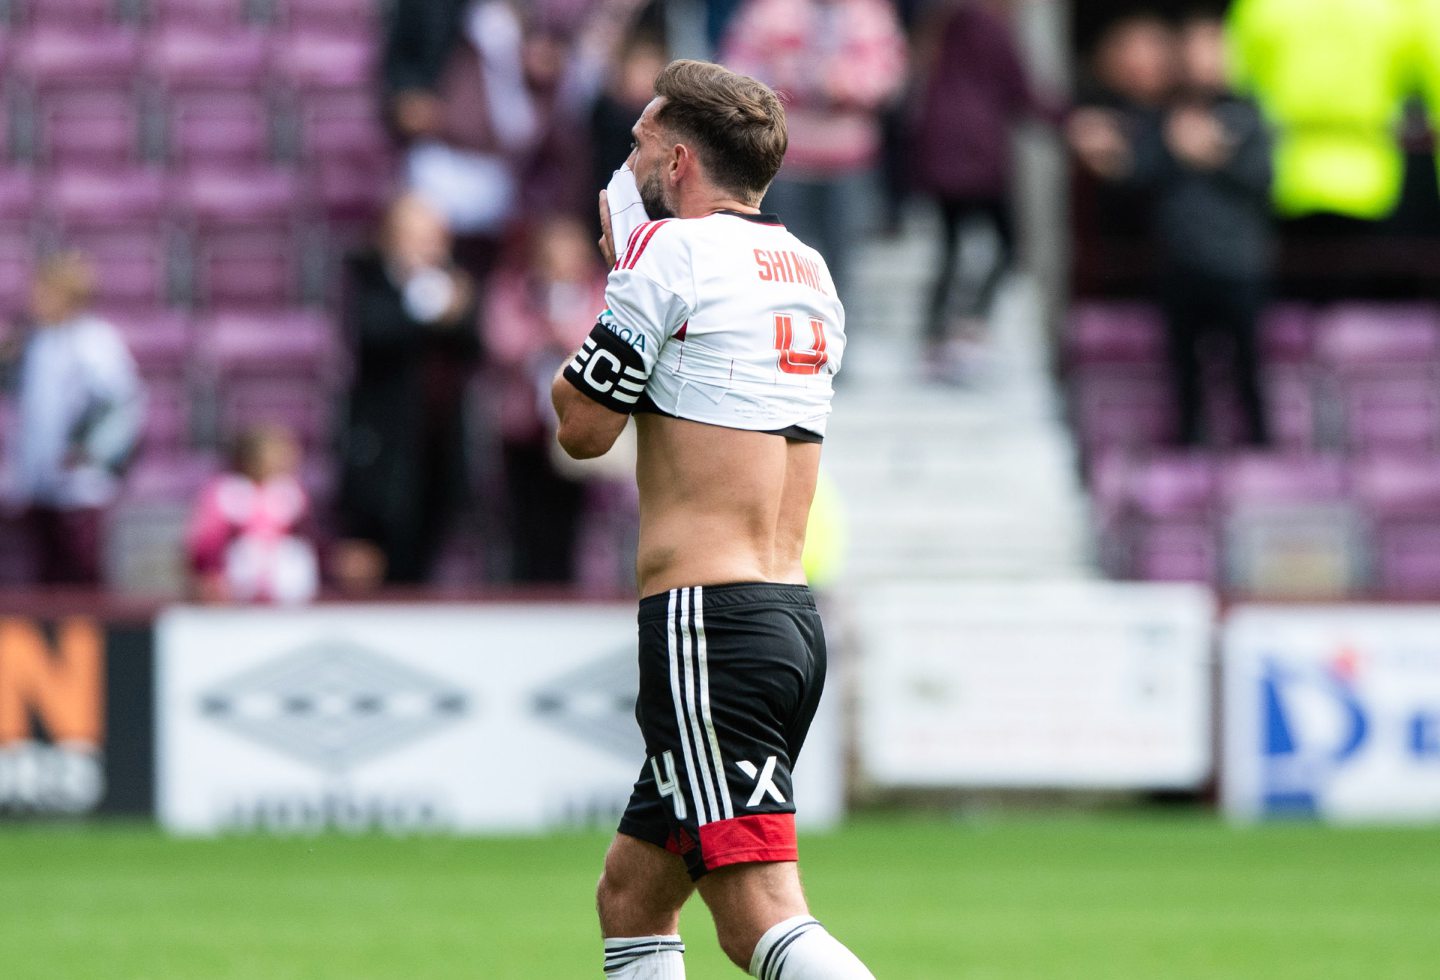 Aberdeen's Graeme Shinnie wiping his face with the hem of his shirt on the pitch